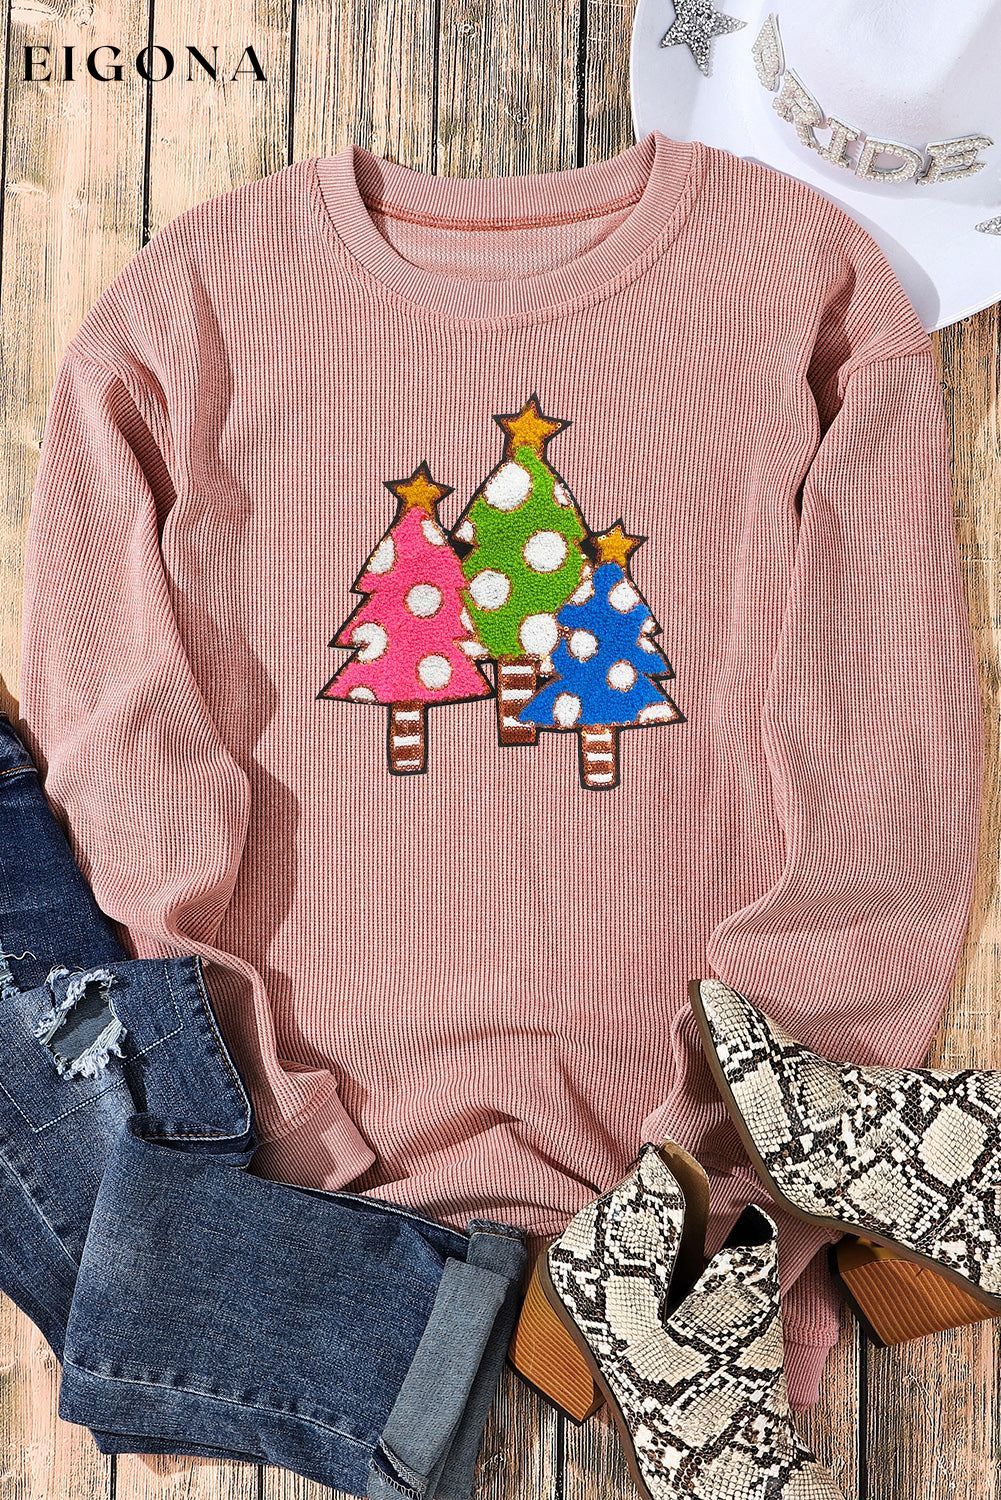 Pink Vintage Wash Sequined Christmas Tree Corded Sweatshirt Best Sellers Christmas christmas sweater clothes Color Pink Day Christmas Fabric Corduroy Fabric Fleece Hot picks Season Fall & Autumn